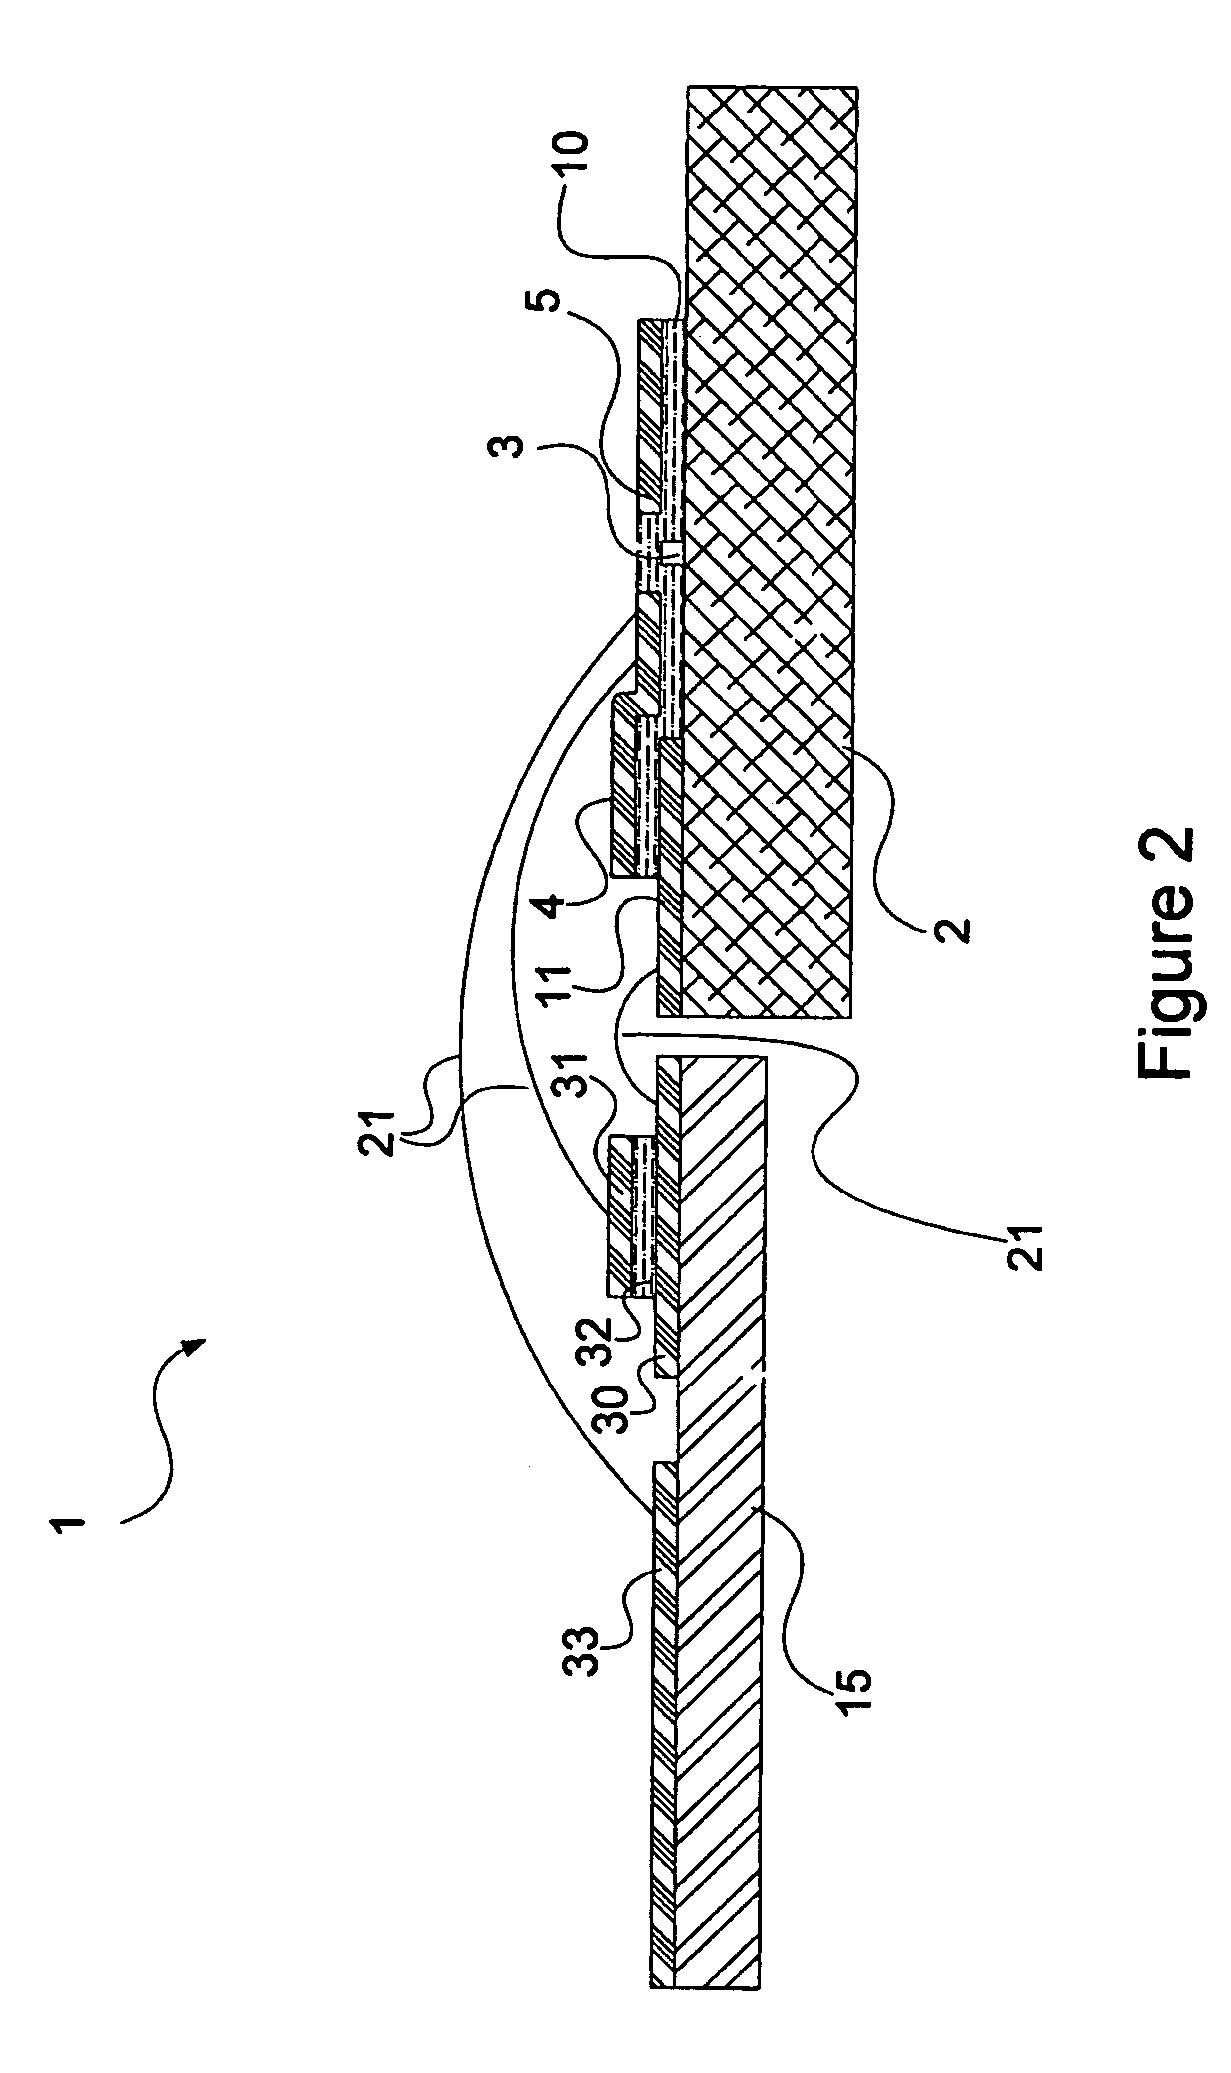 Method and apparatus for improving frequency response in mode converters